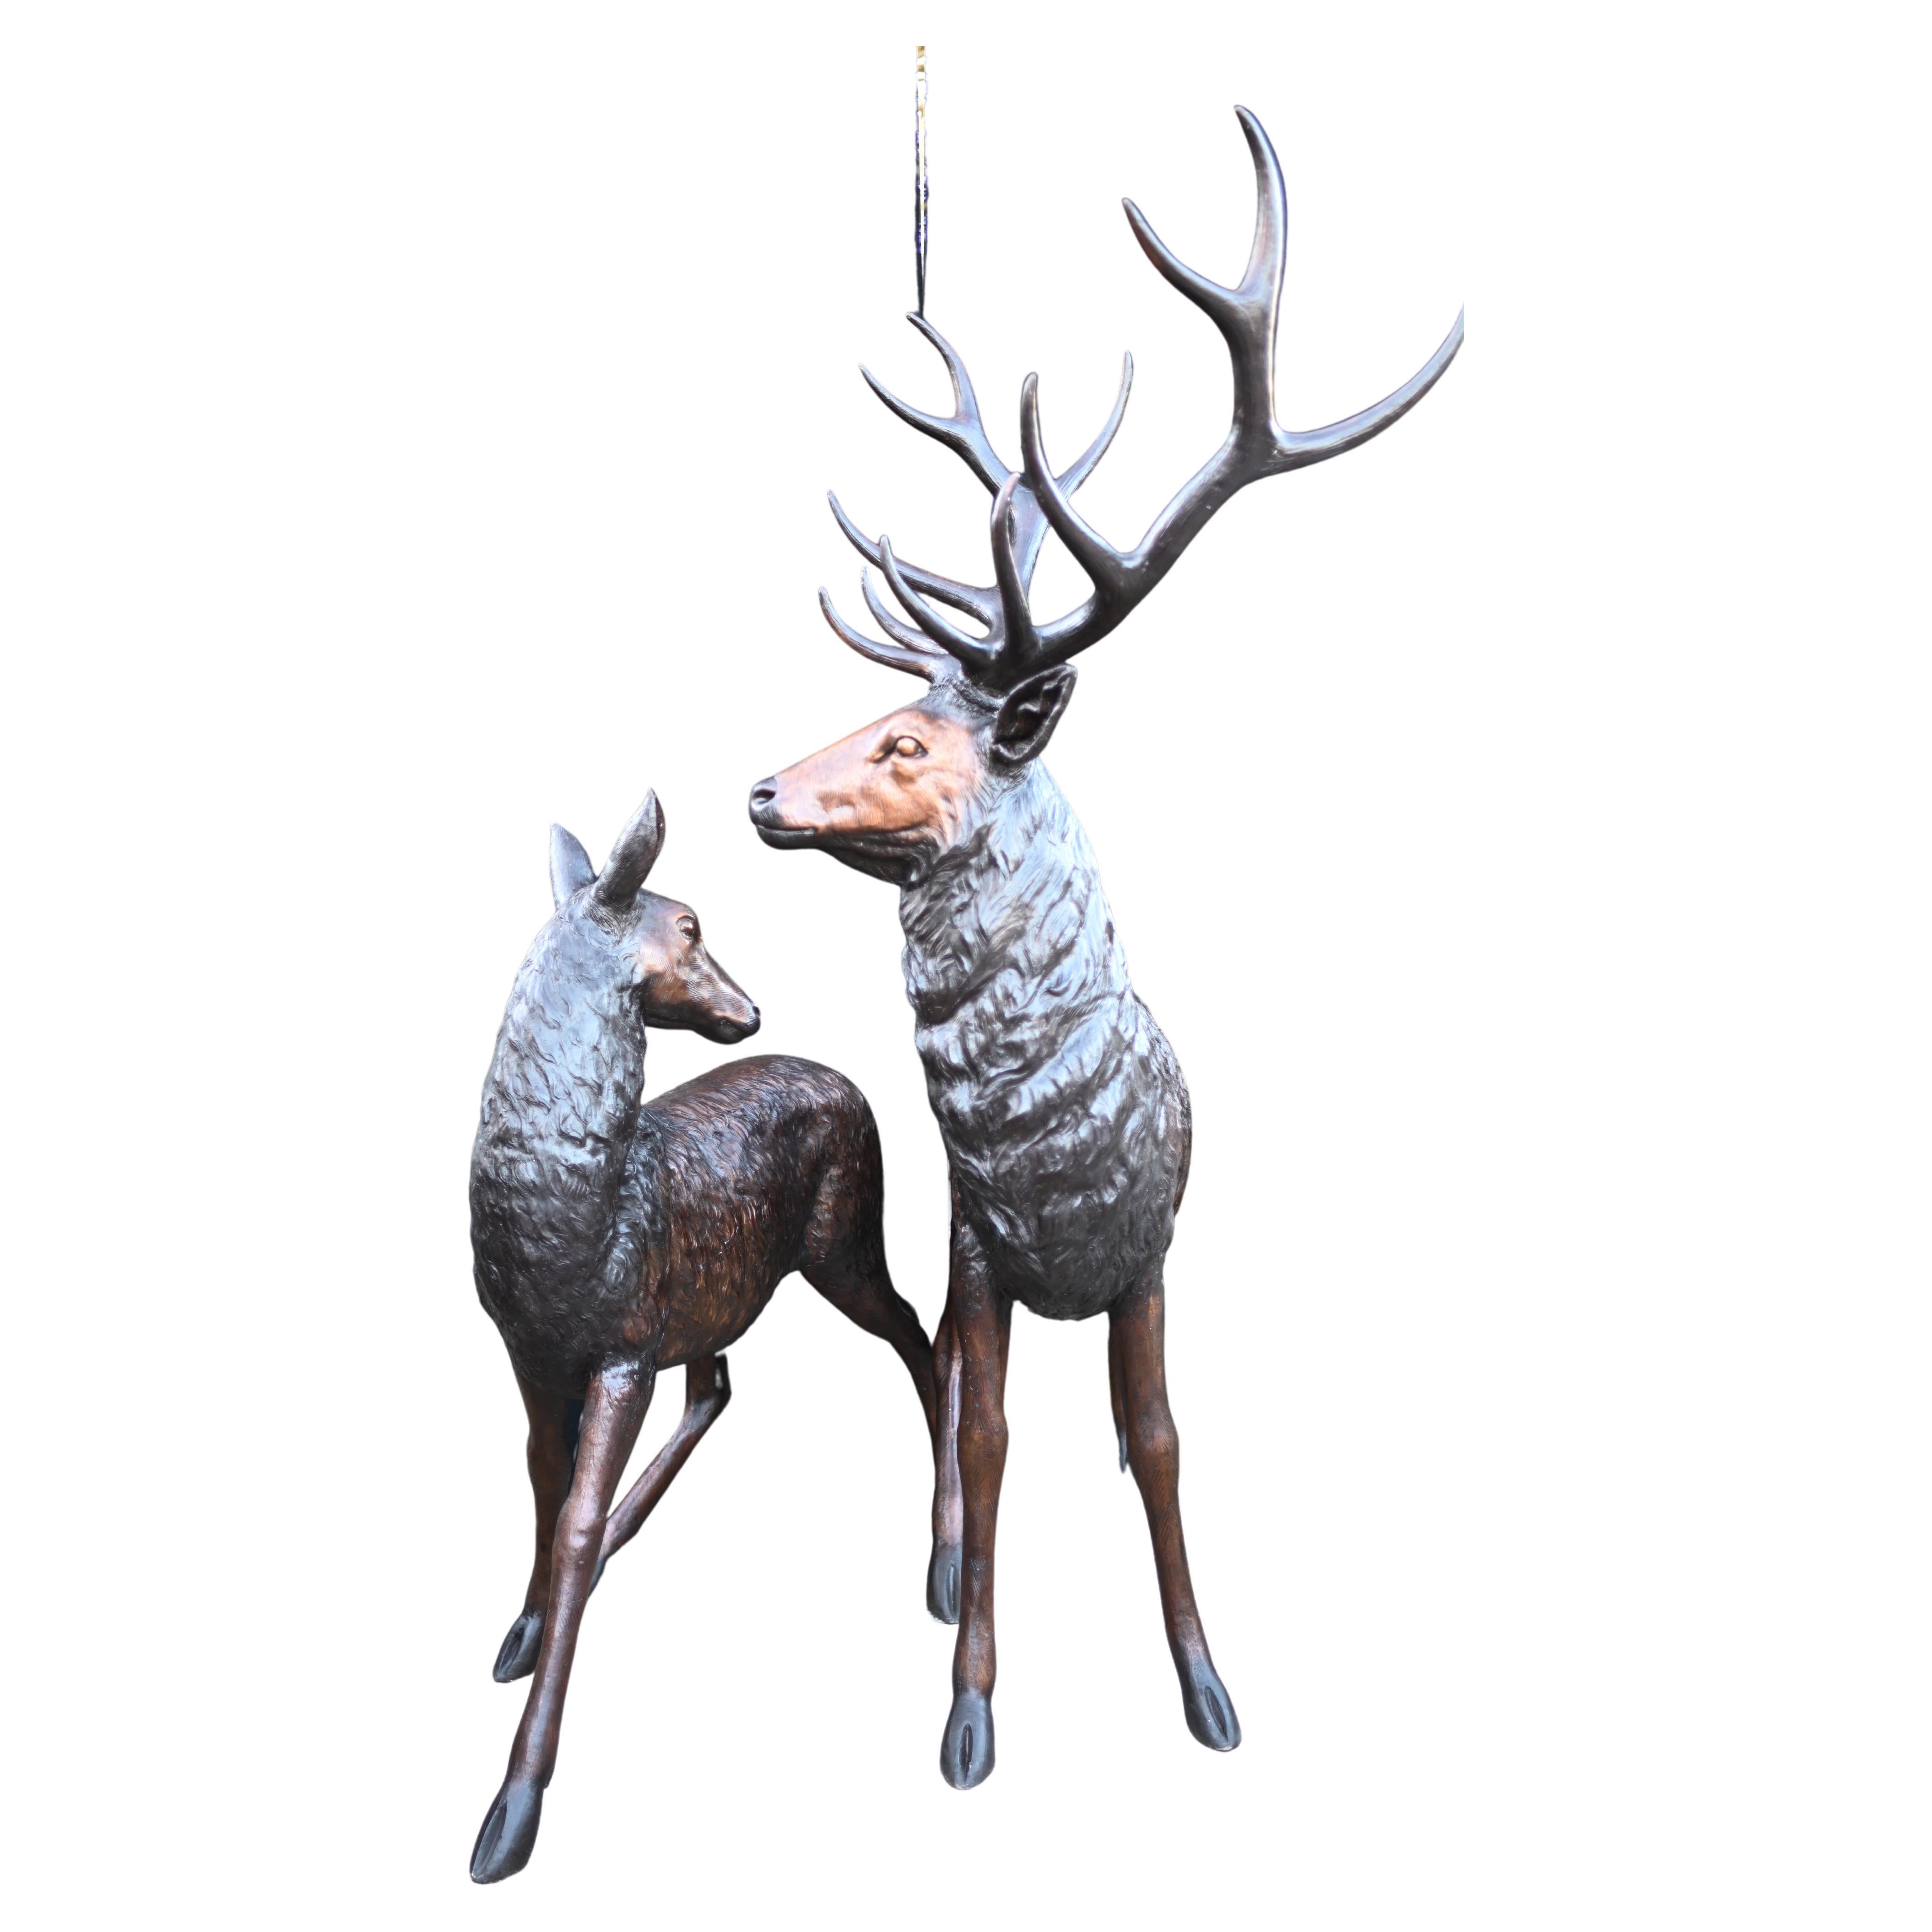 Bronze Stag and Deer Statues Pair Scottish Highland Garden Castings For Sale